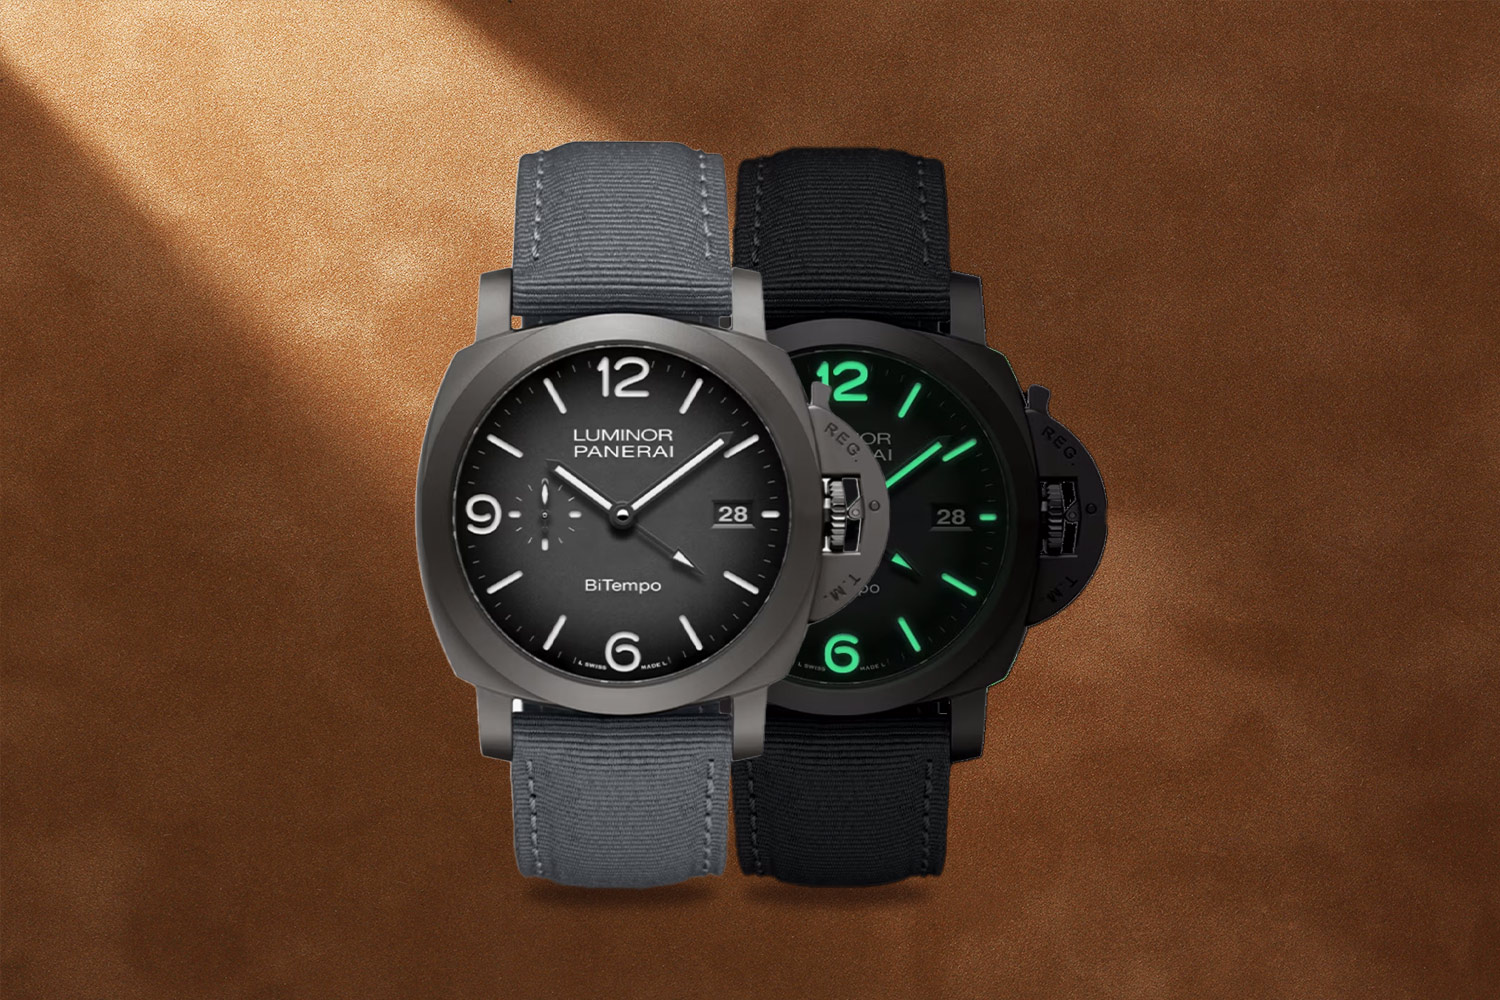 Black and gray watches